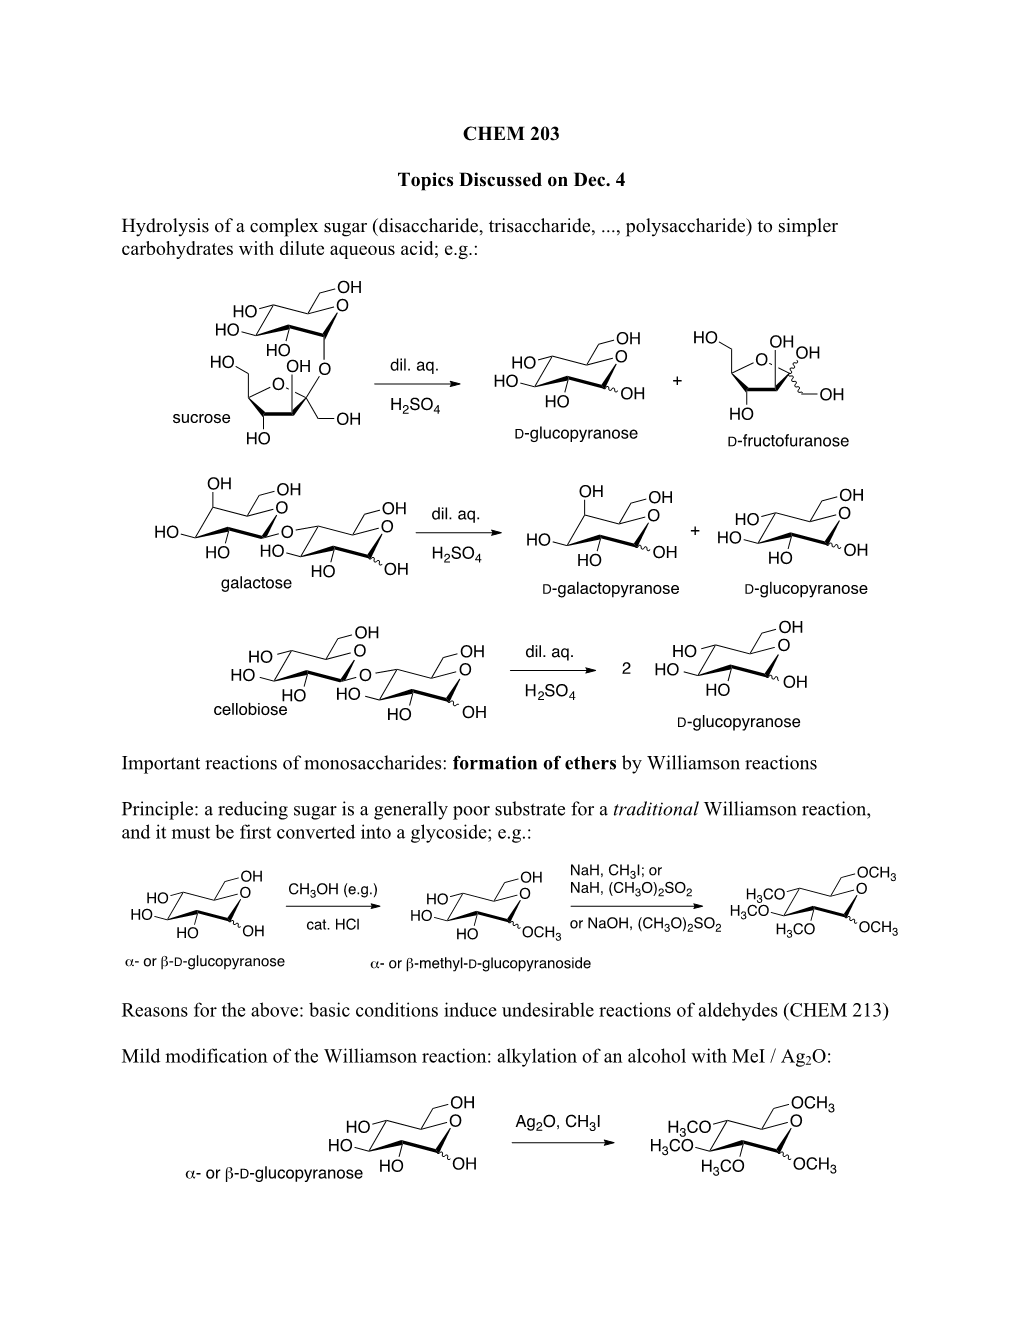 CHEM 203 Topics Discussed on Dec. 4 Hydrolysis of a Complex Sugar